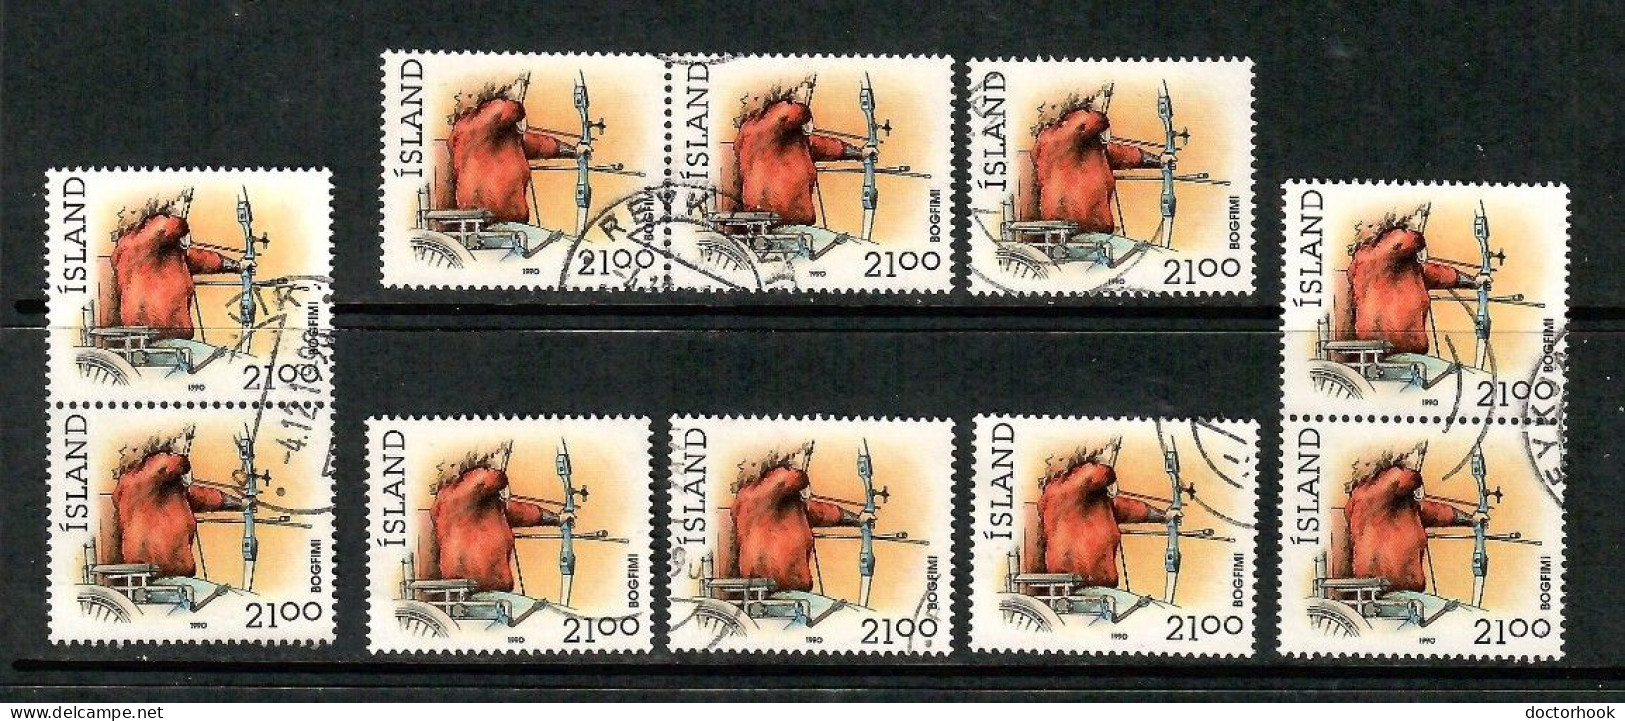 ICELAND   Scott # 700 USED WHOLESALE LOT OF 10 (CONDITION AS PER SCAN) (WH-623) - Collections, Lots & Series